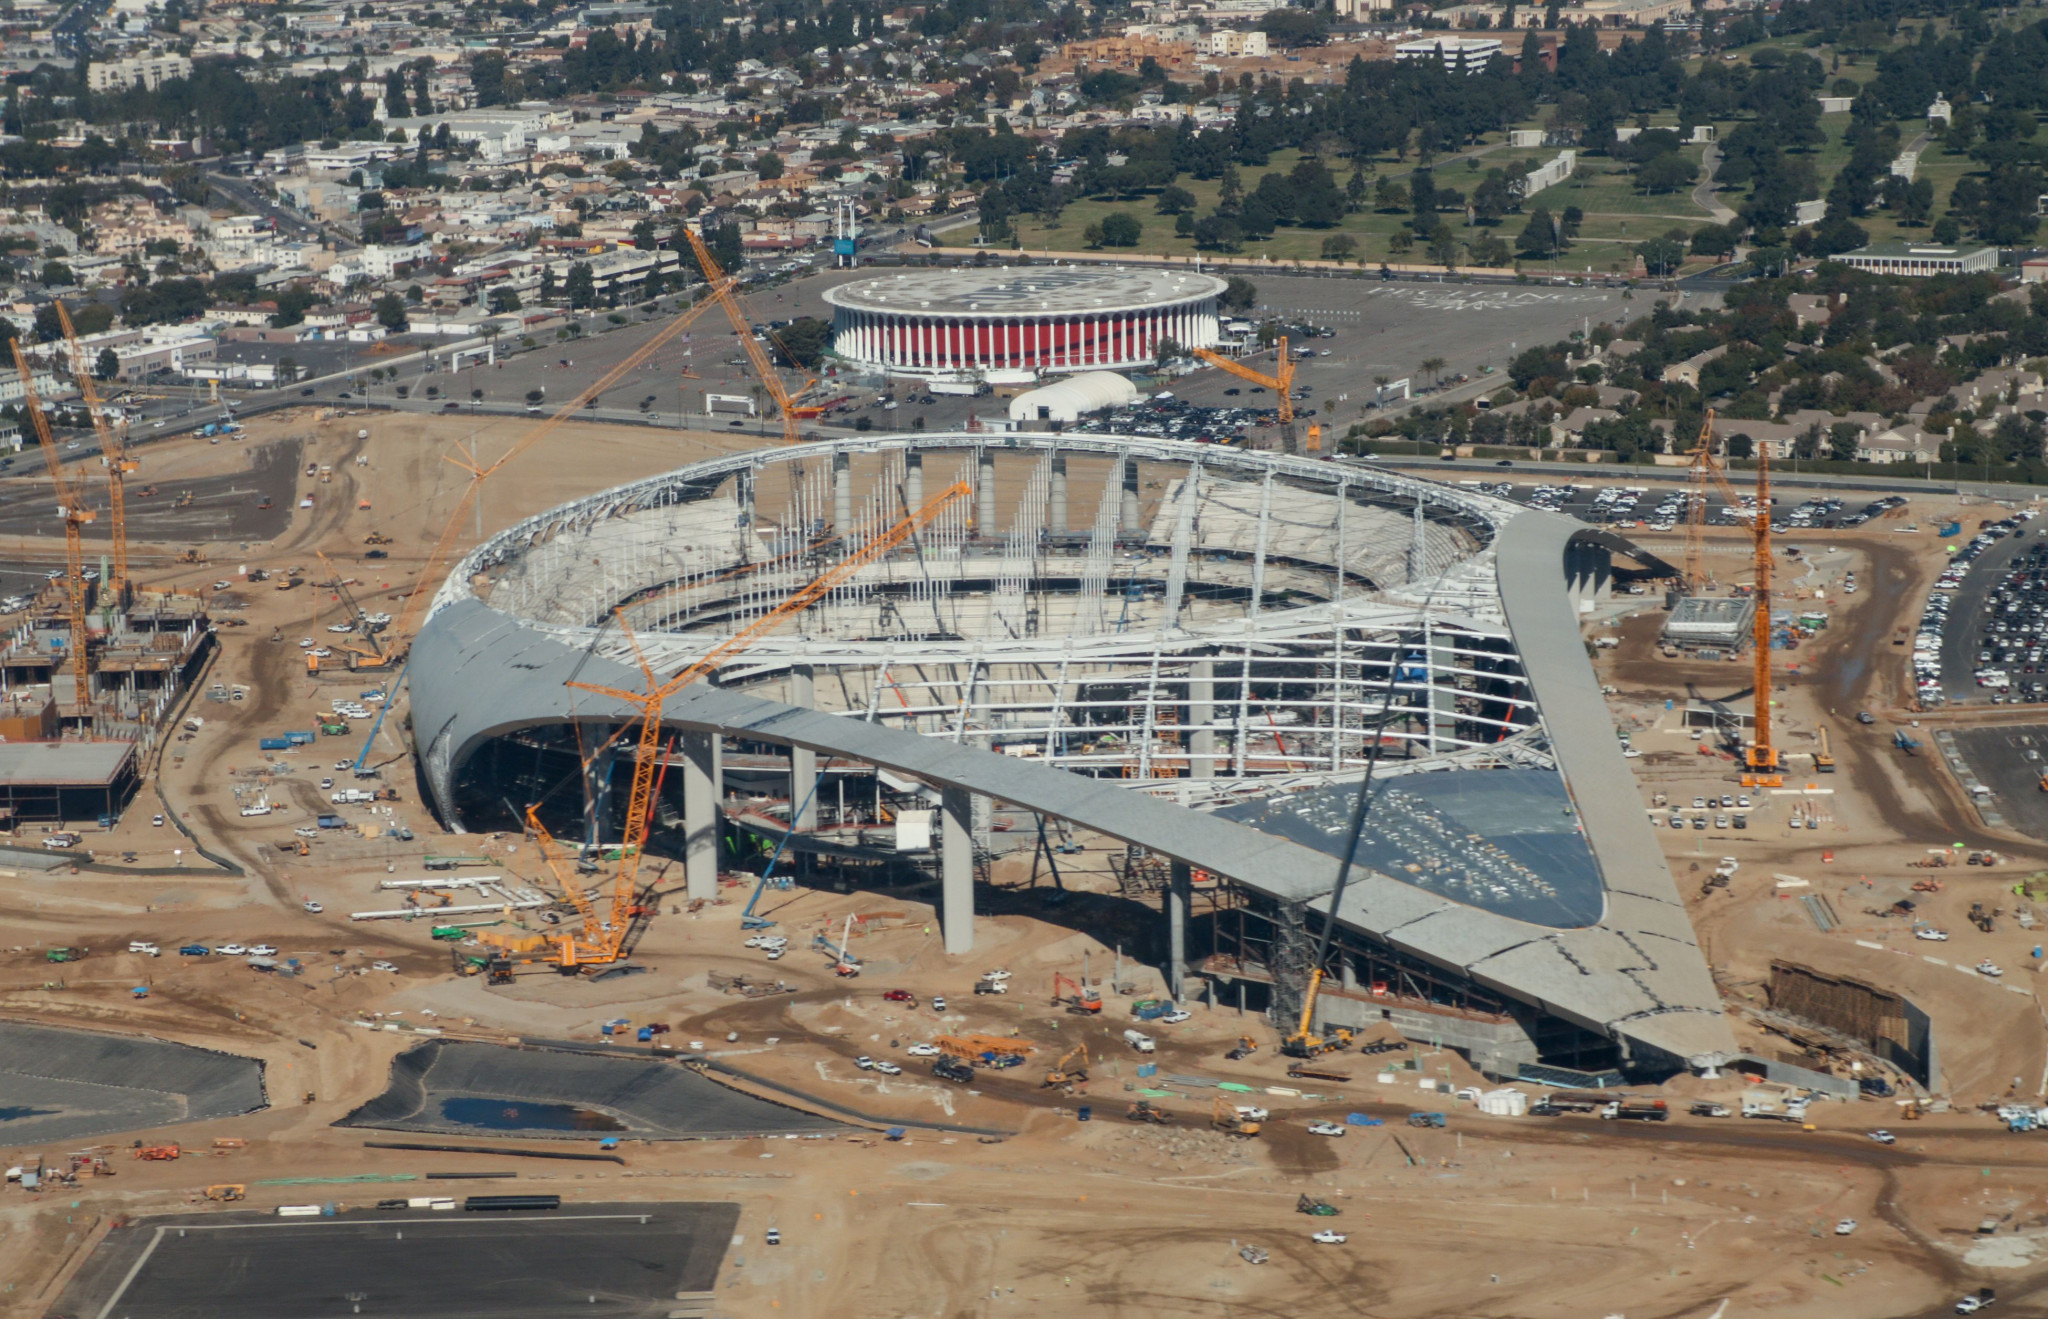 The new SoFi Stadium is due to host the 2022 Super Bowl - the biggest event in Los Angeles since the 1984 Olympics, and which will be a major warm-up for the 2028 Games ©Getty Images